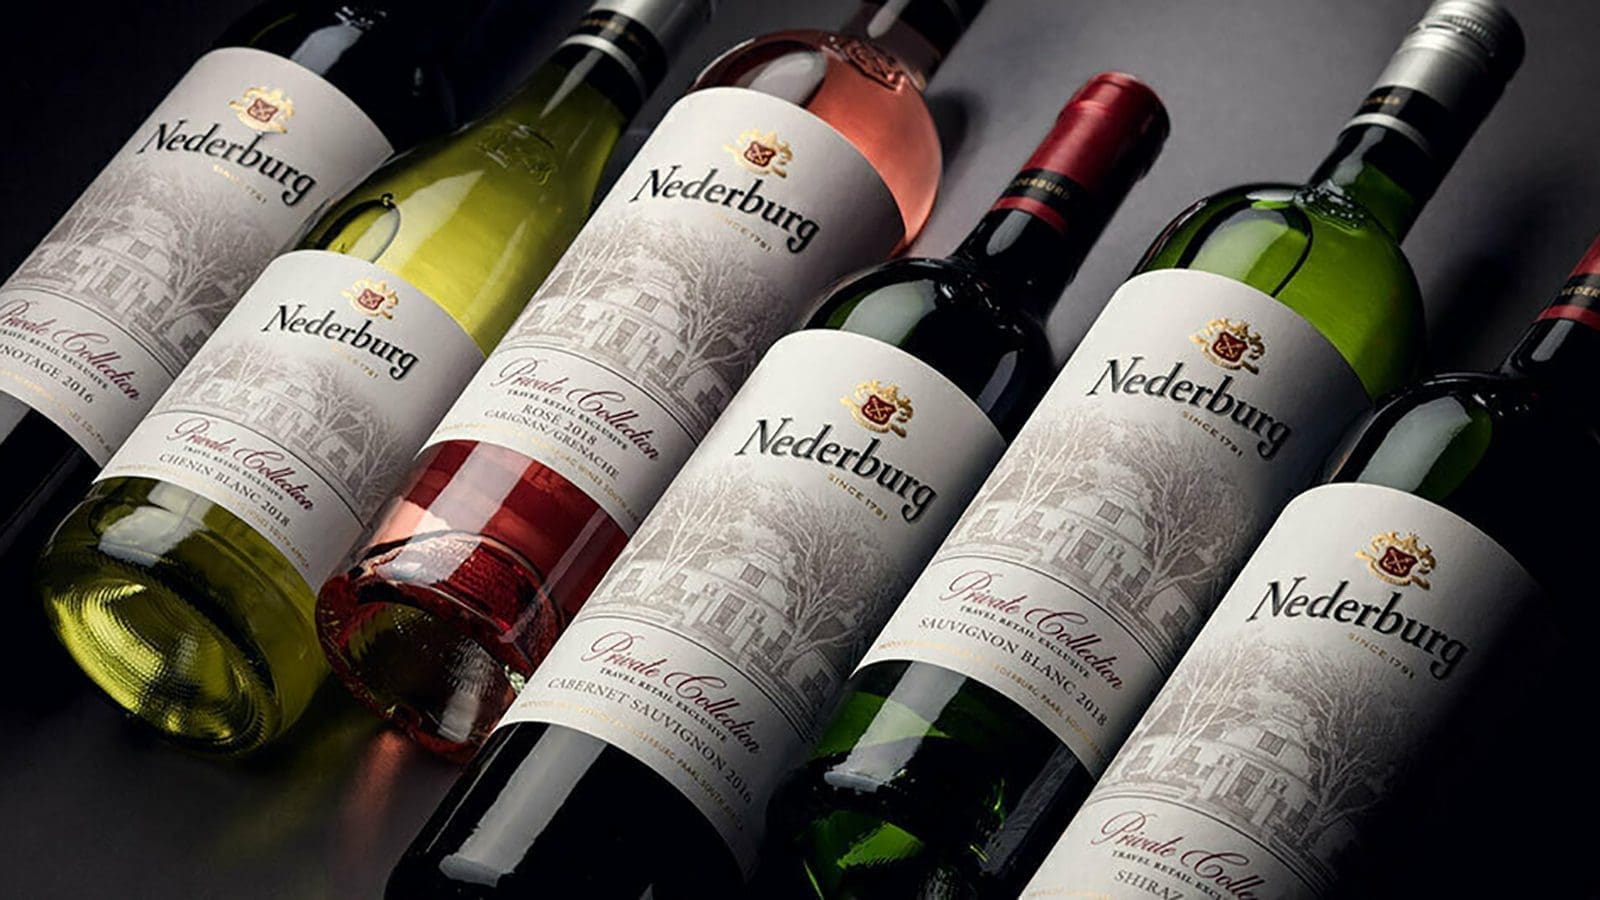 Distell’s Nederburg wines offers helping hand to South African restaurants